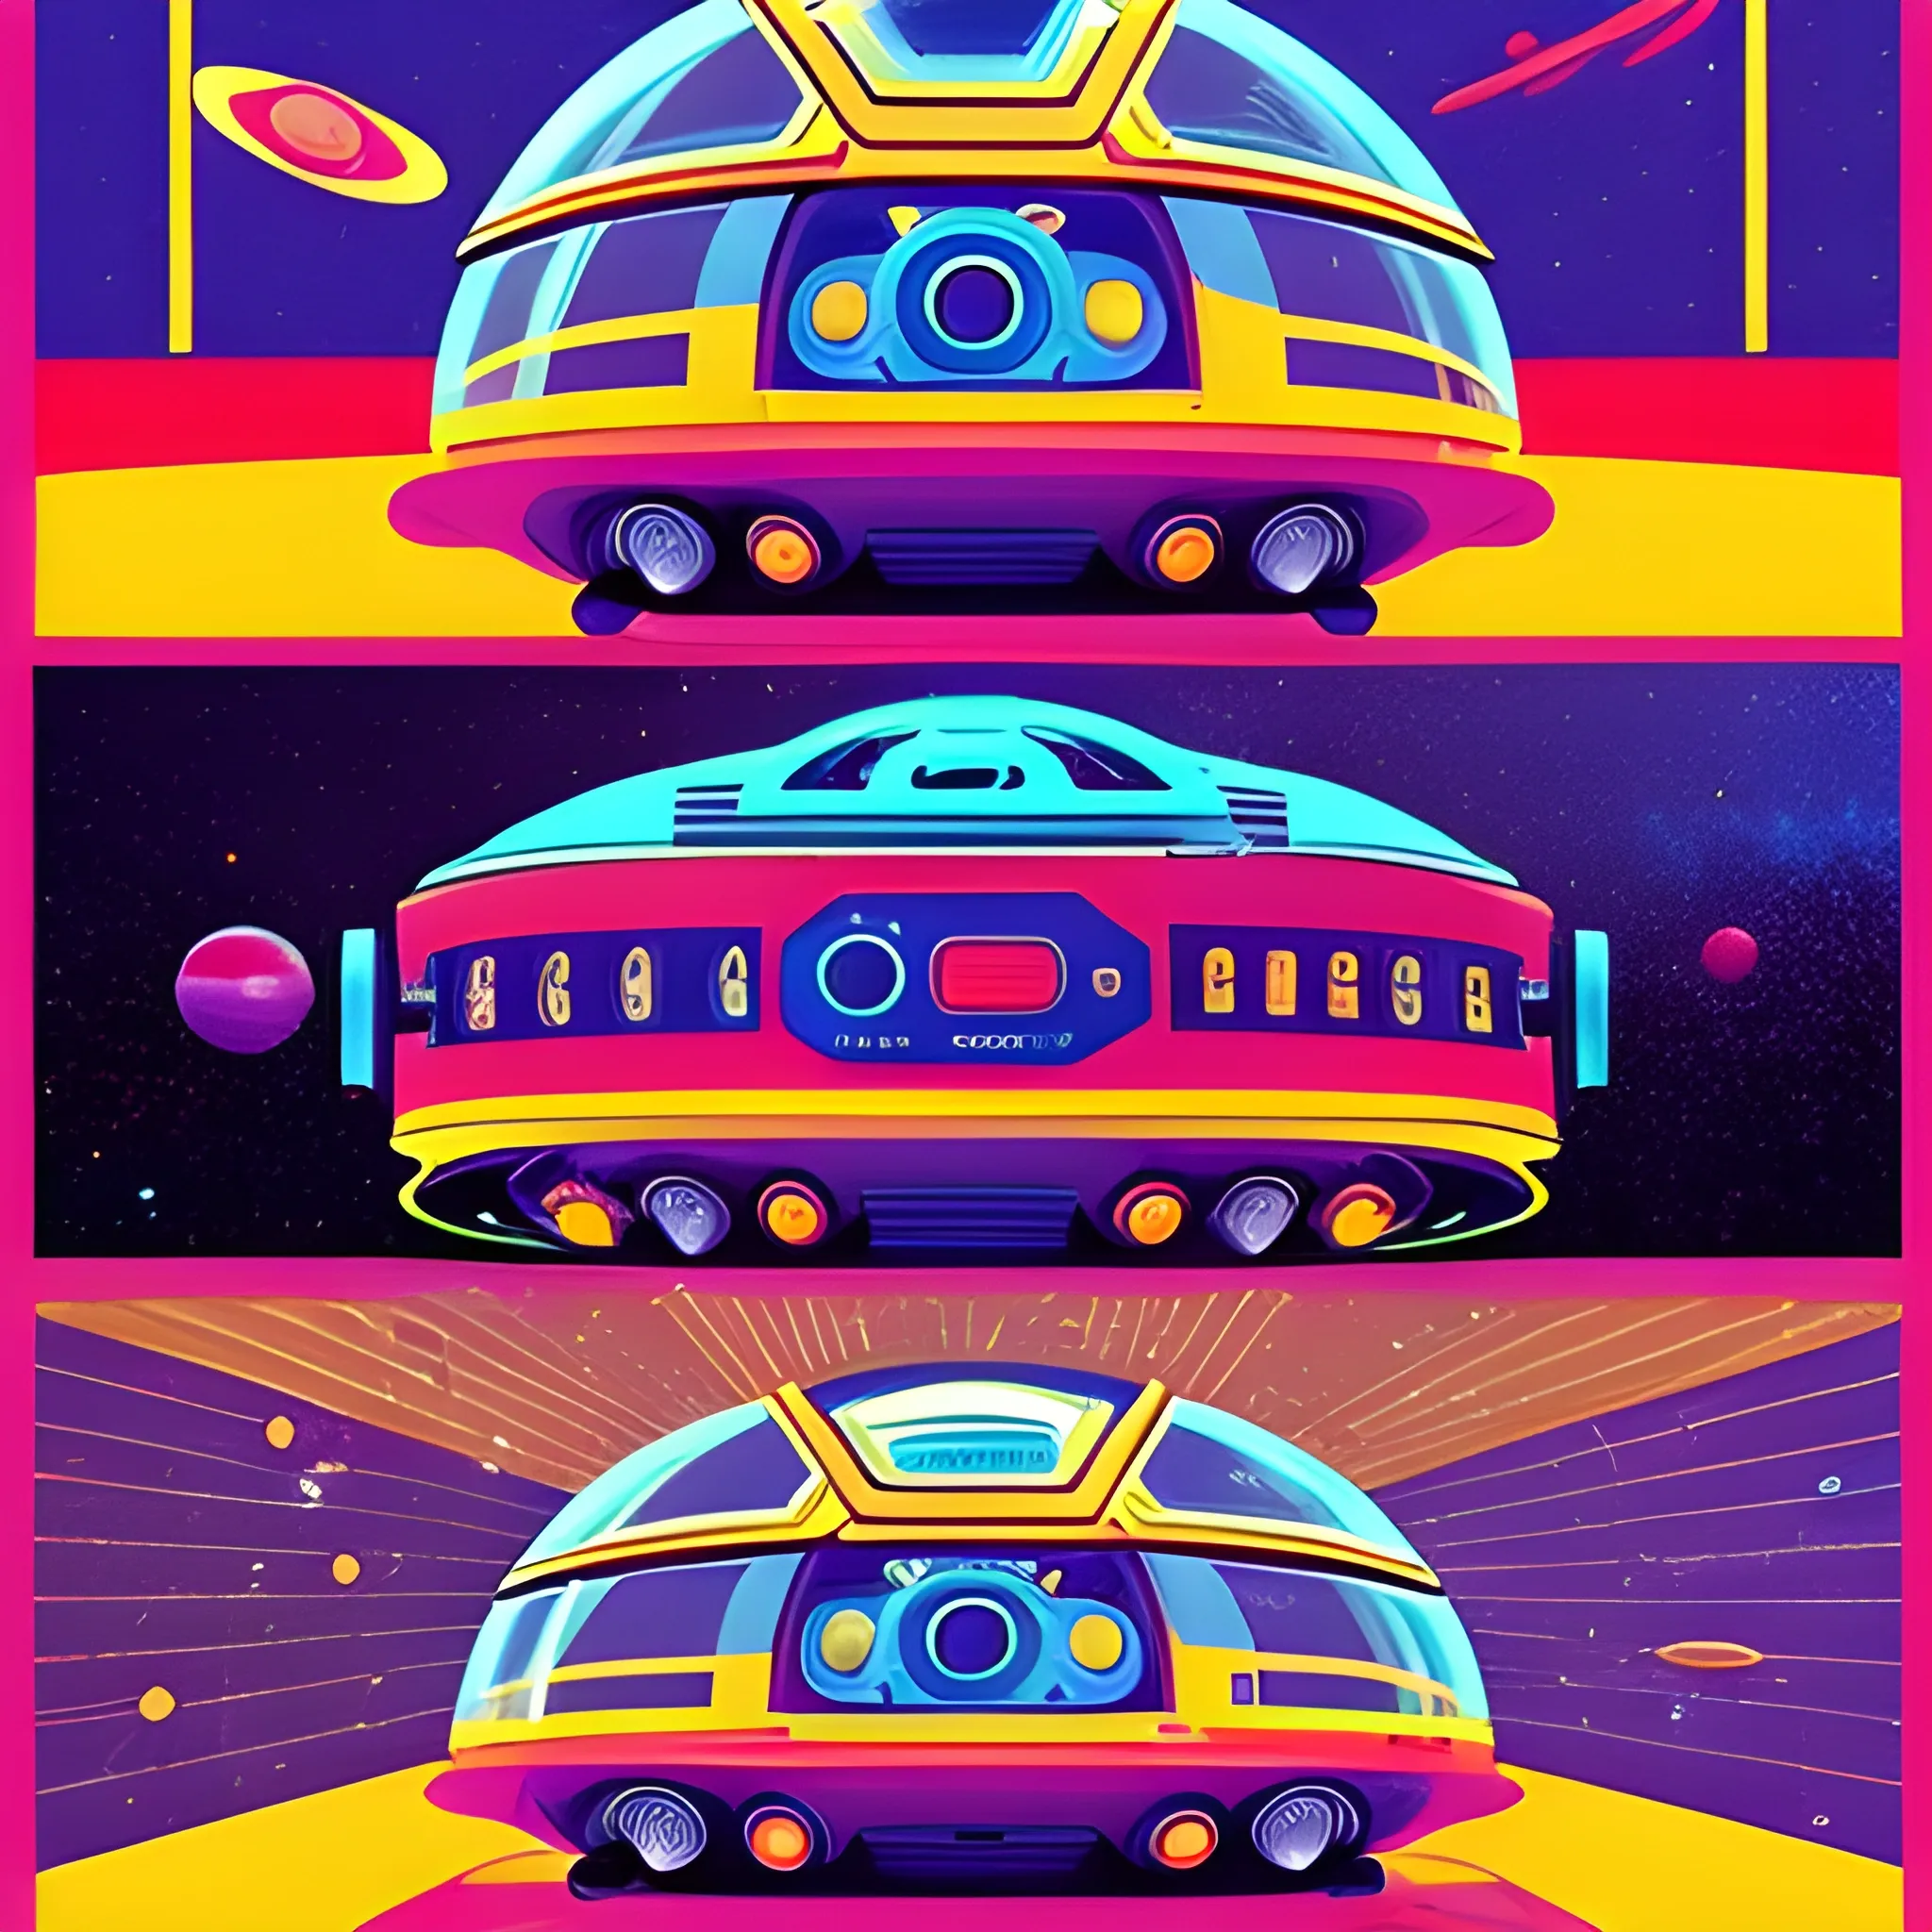 Retro style that evokes space age nostalgia of the 60s and 70s. Uses vibrant colors and graphics inspired by old sci-fi movies., 3D